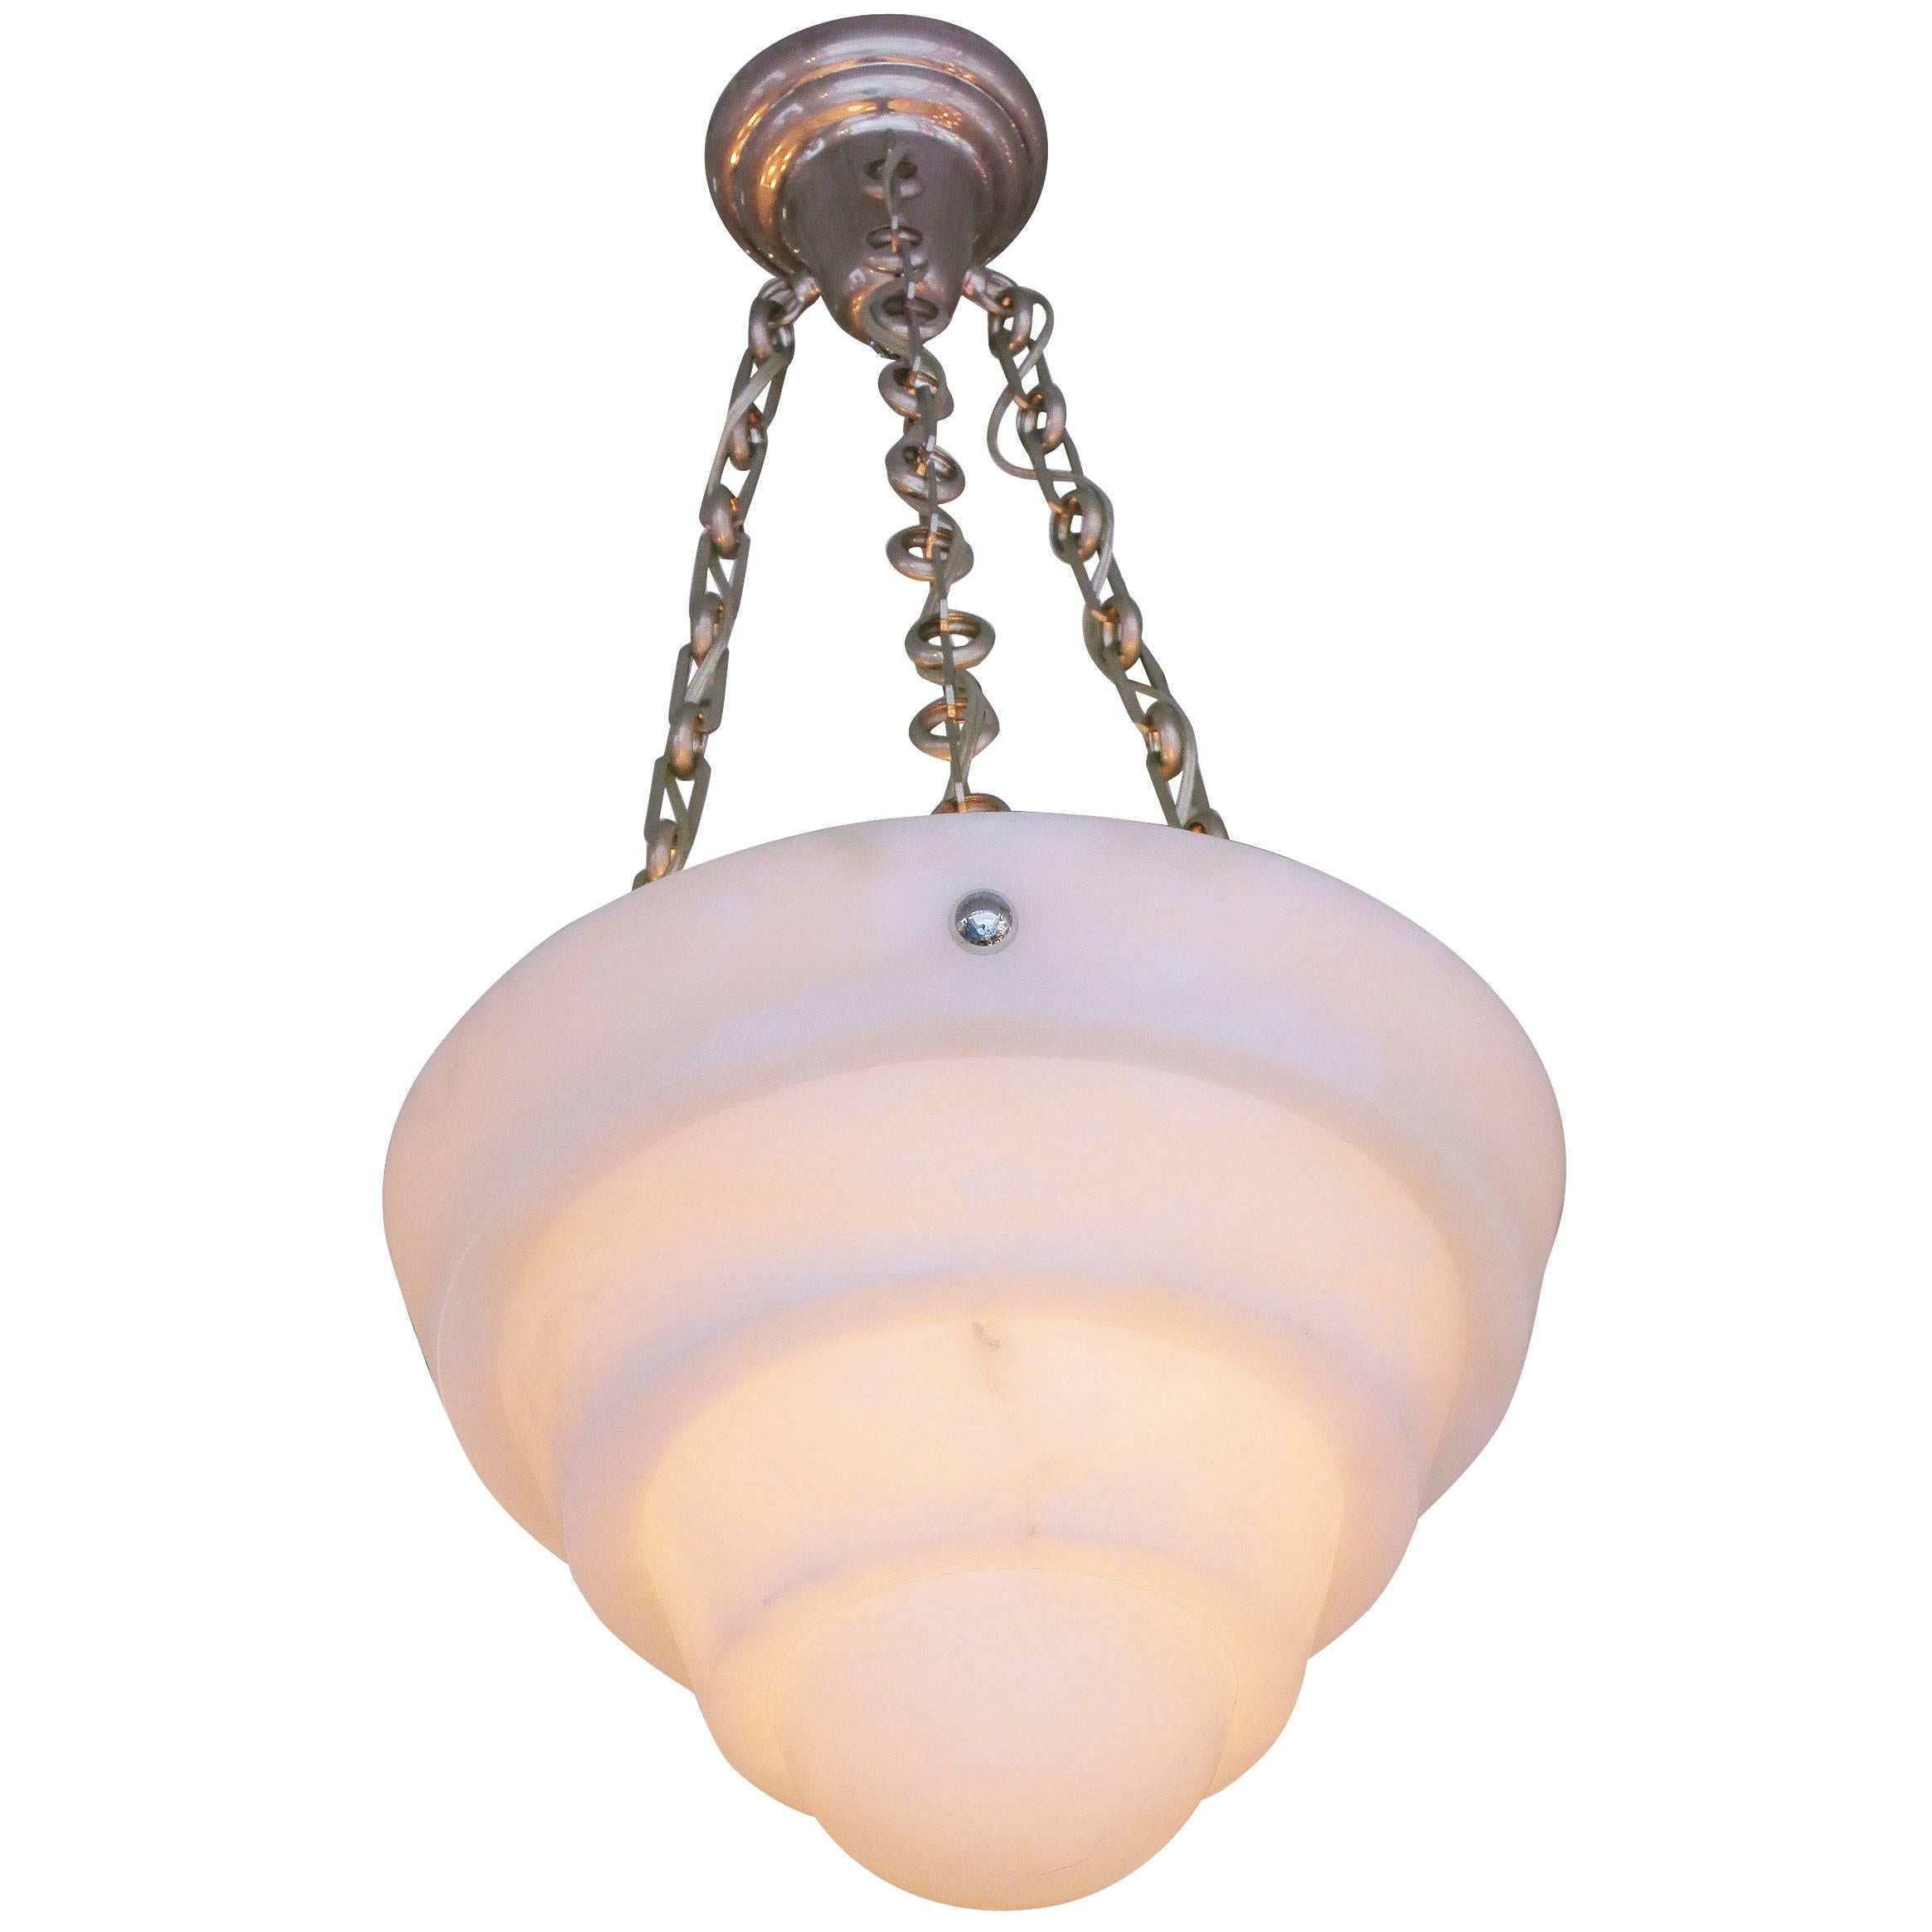 Large hand-carved stepped modern alabaster chandelier with silver plate bronze chains attached to a silver-plated bronze ceiling fixture. 

This large deep hand carved 14